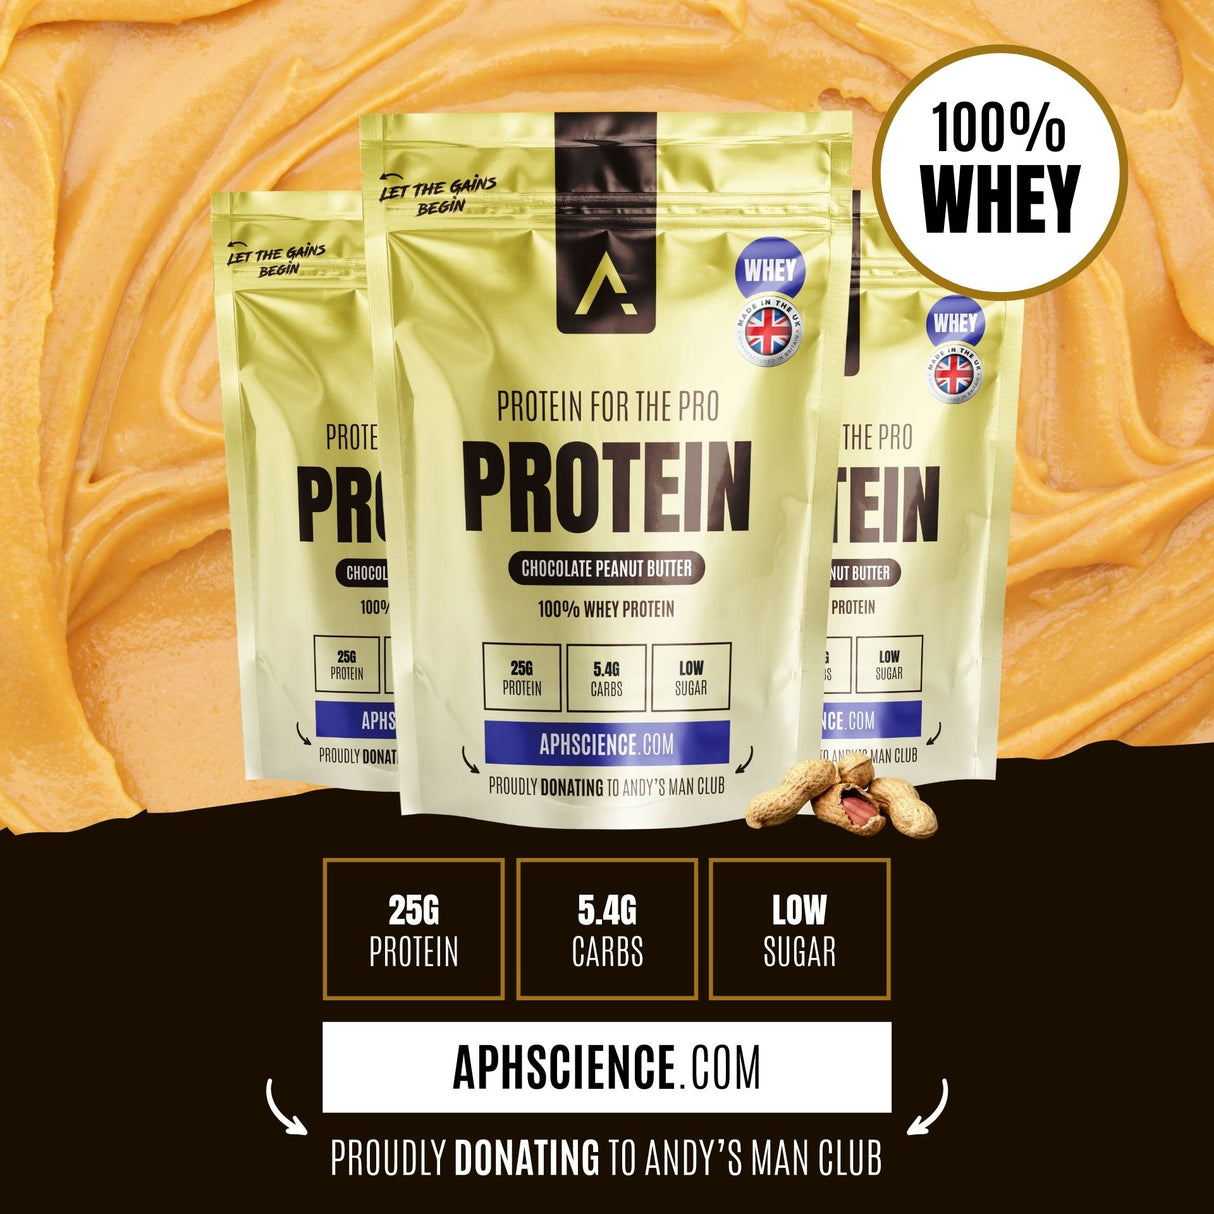 Whey Protein: Chocolate Peanut Butter